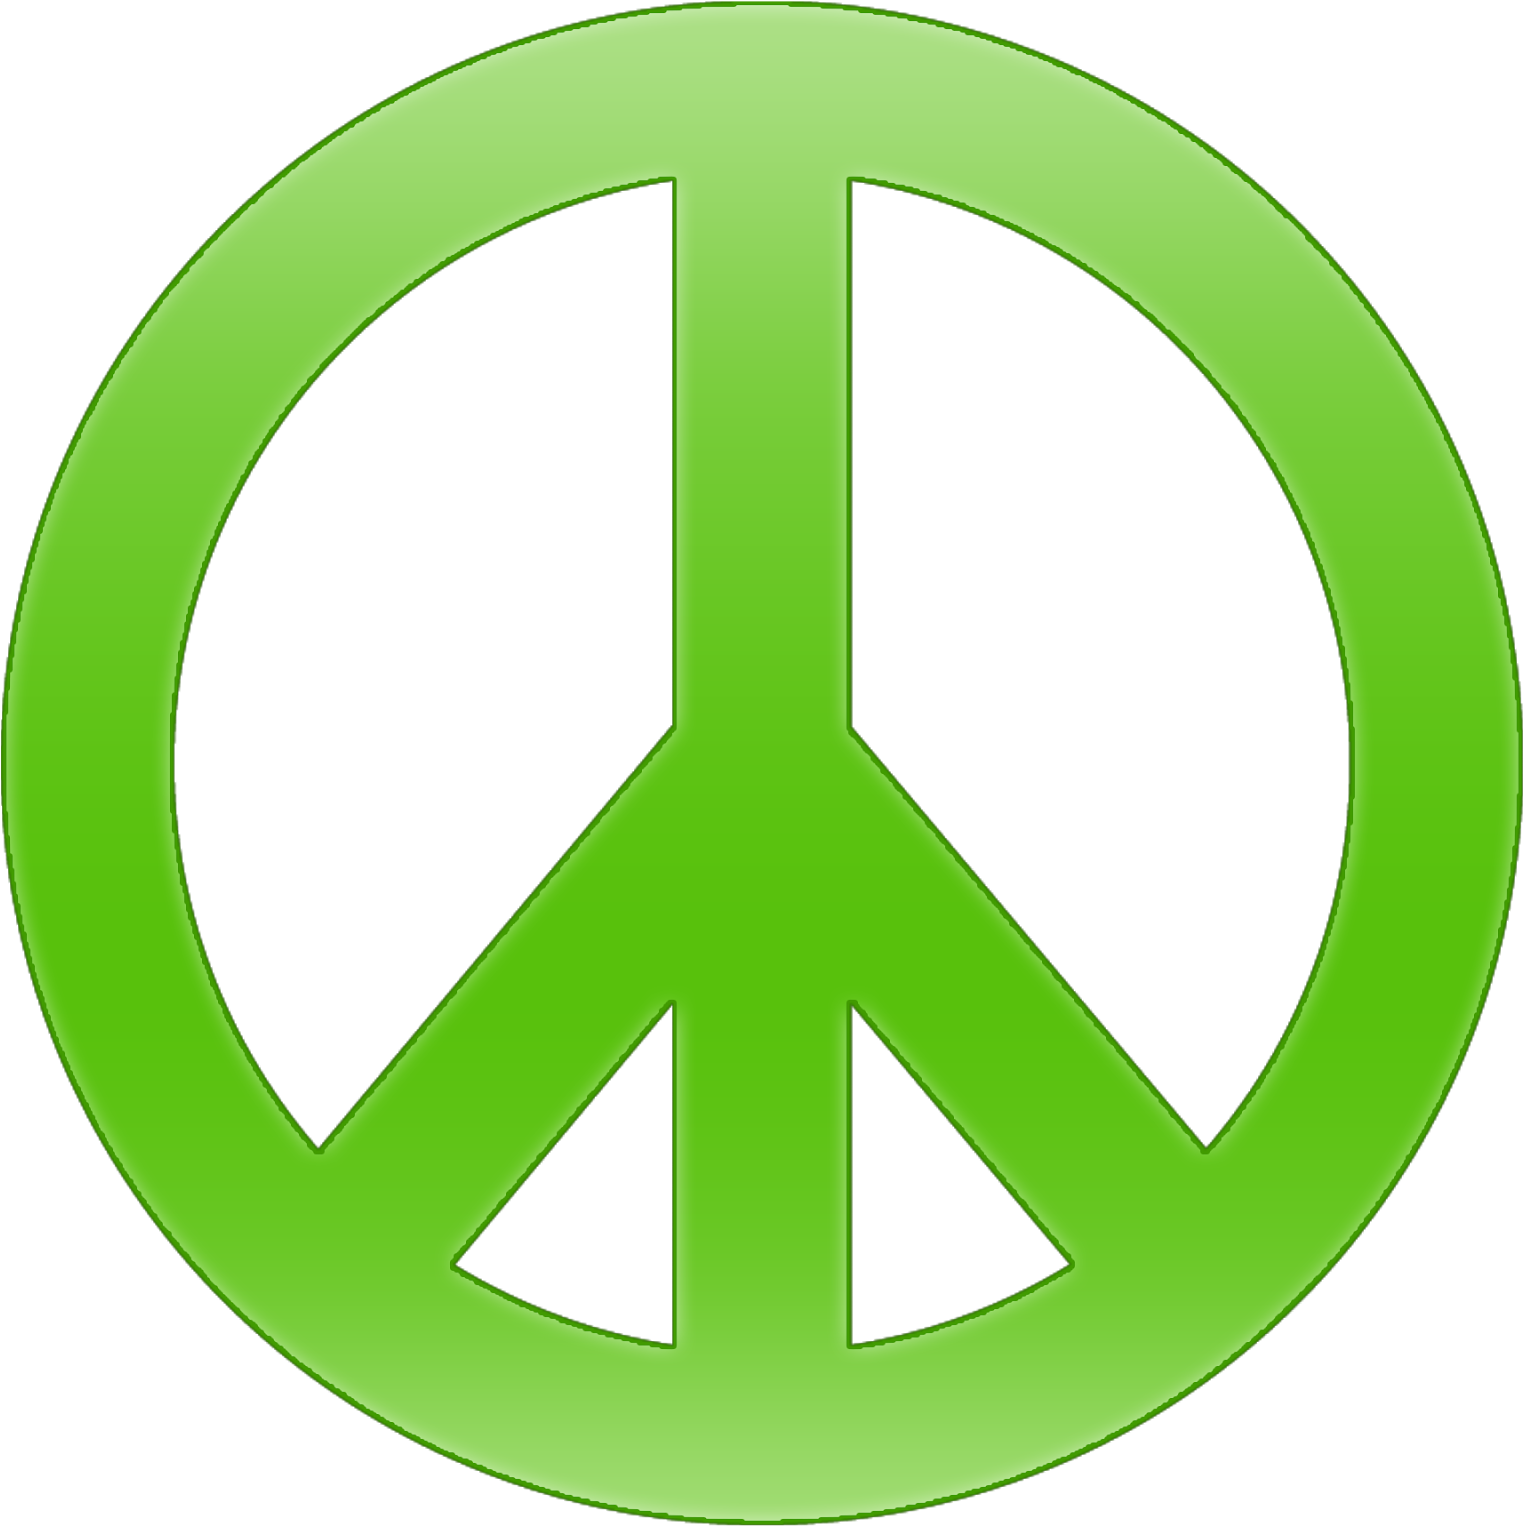 A Green Peace Sign With Black Background